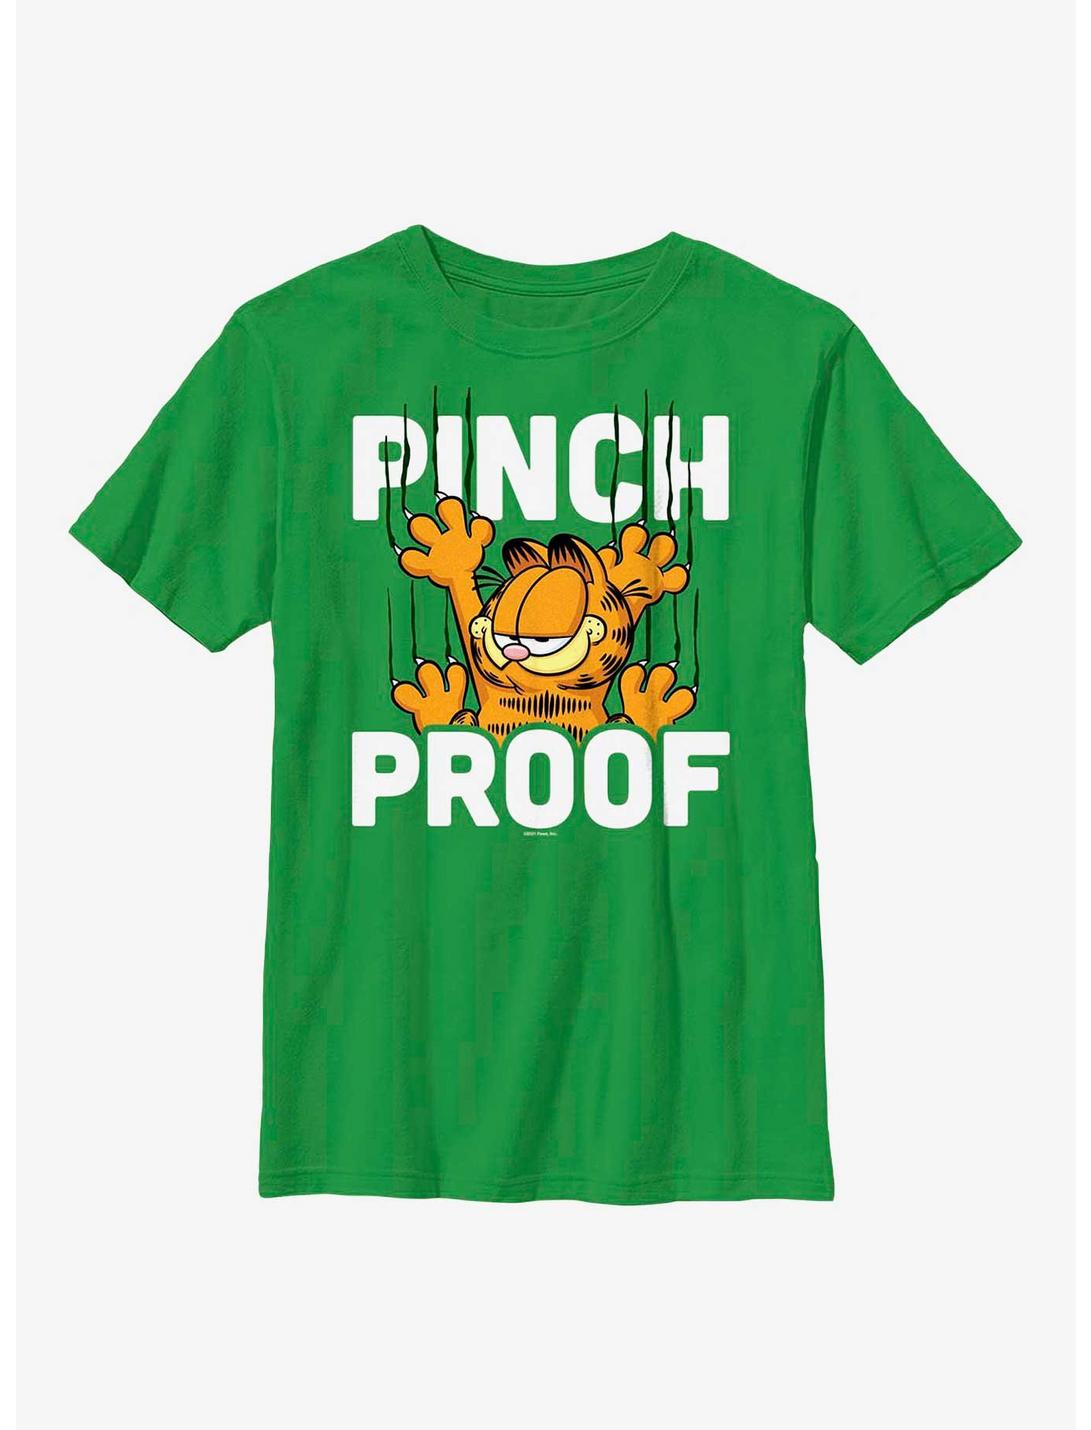 Garfield Pinch Proof Youth T-Shirt, KELLY, hi-res